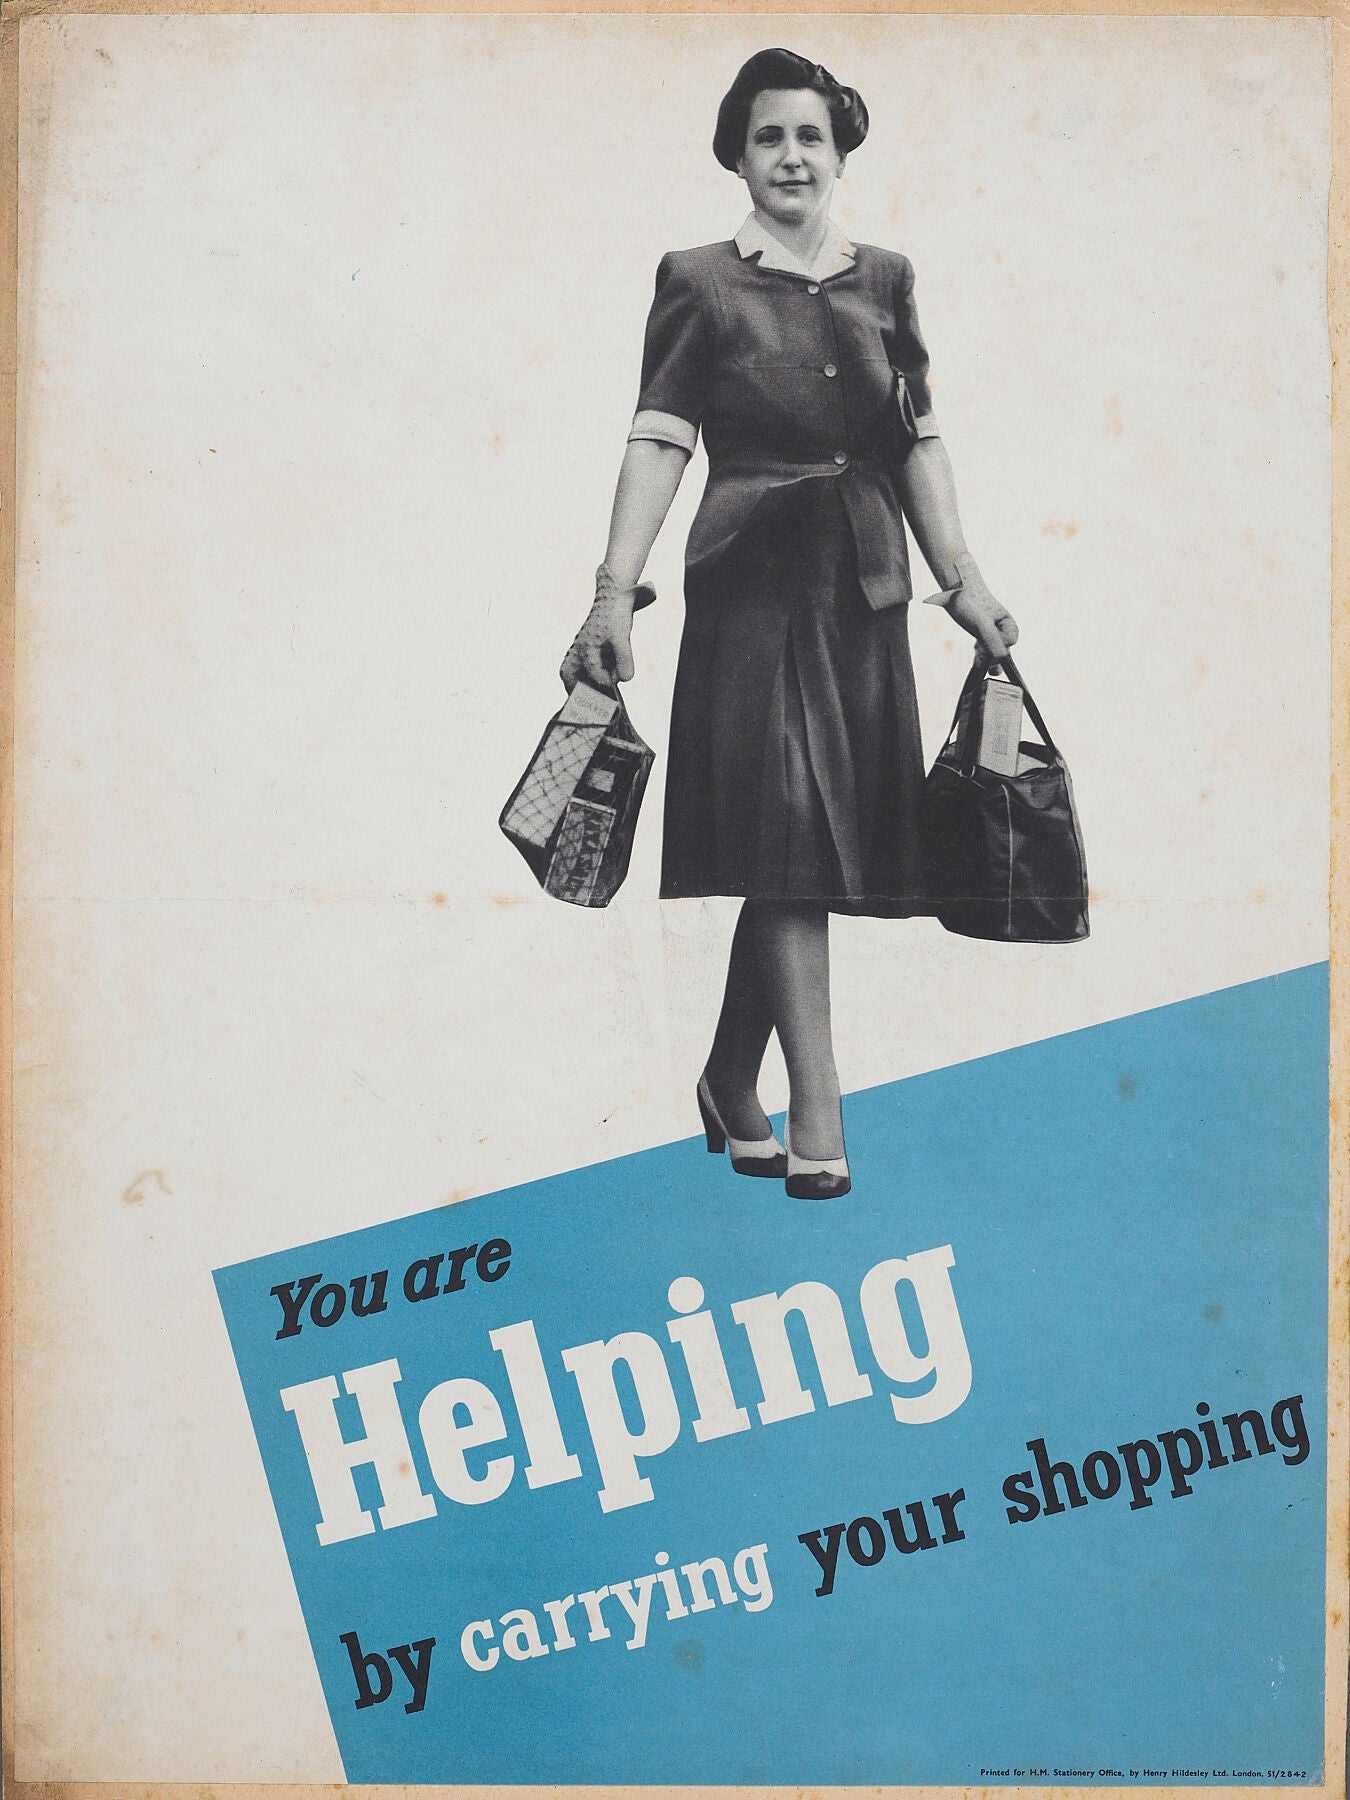 You are helping by carrying your shopping' poster ProductionHenry Hildesley Ltd.; printing firm; Early 1940s